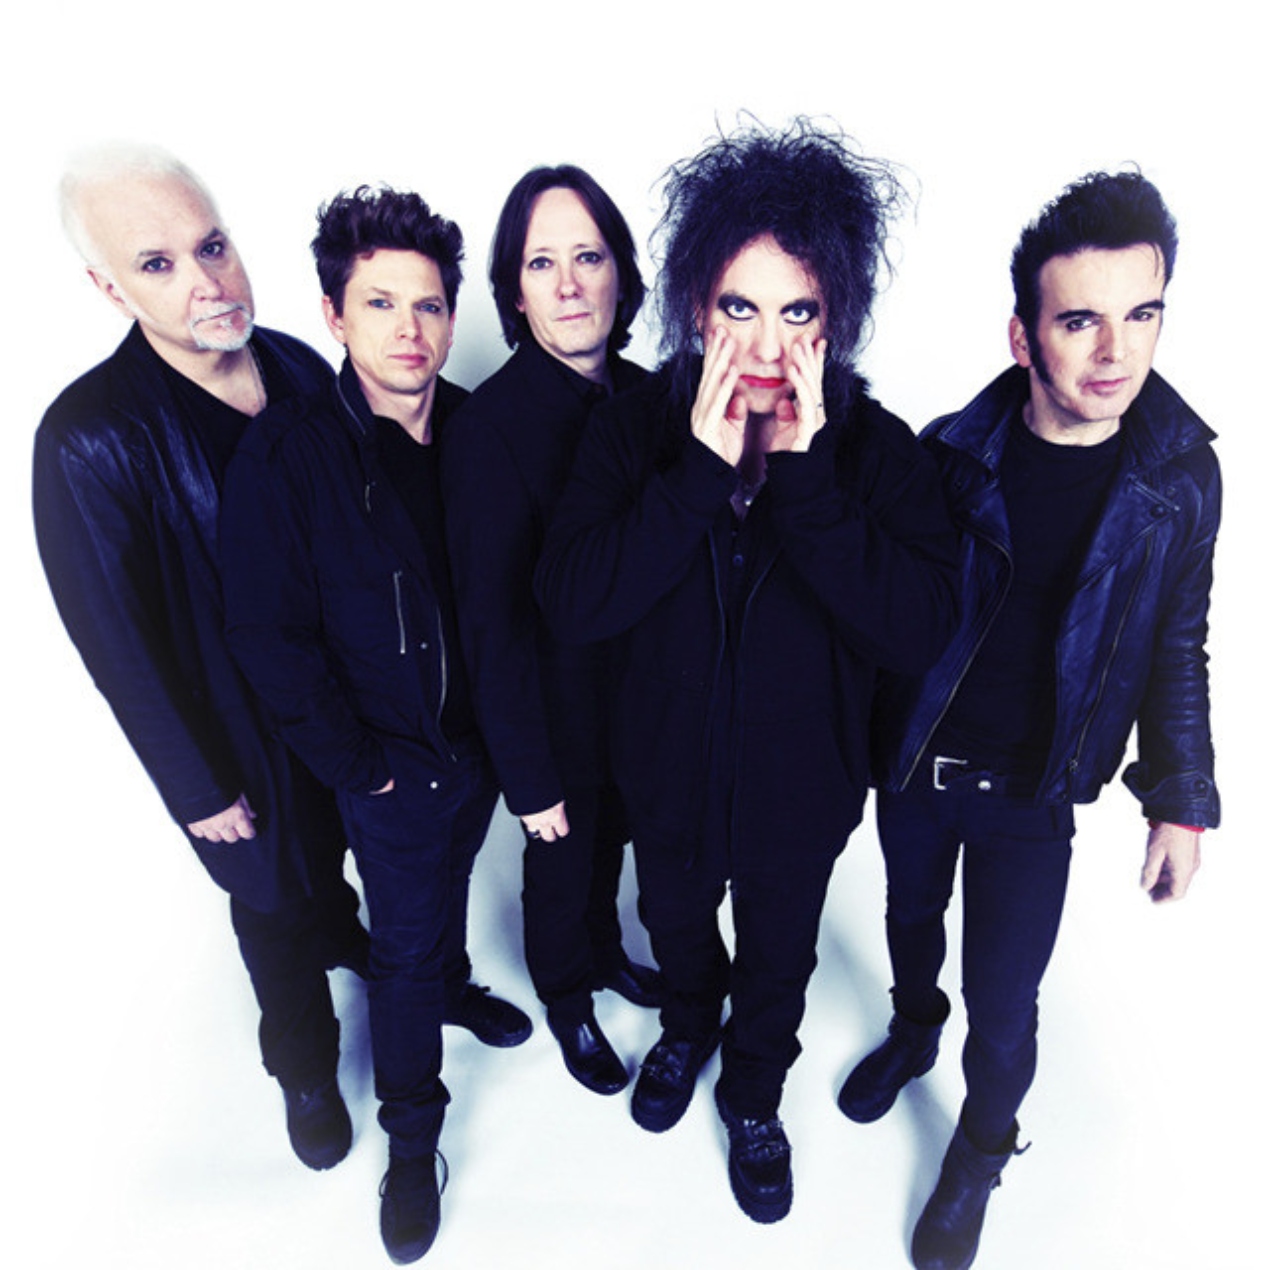 The Cure's Simon Gallup Says He's No Longer In The Band: “Just Got